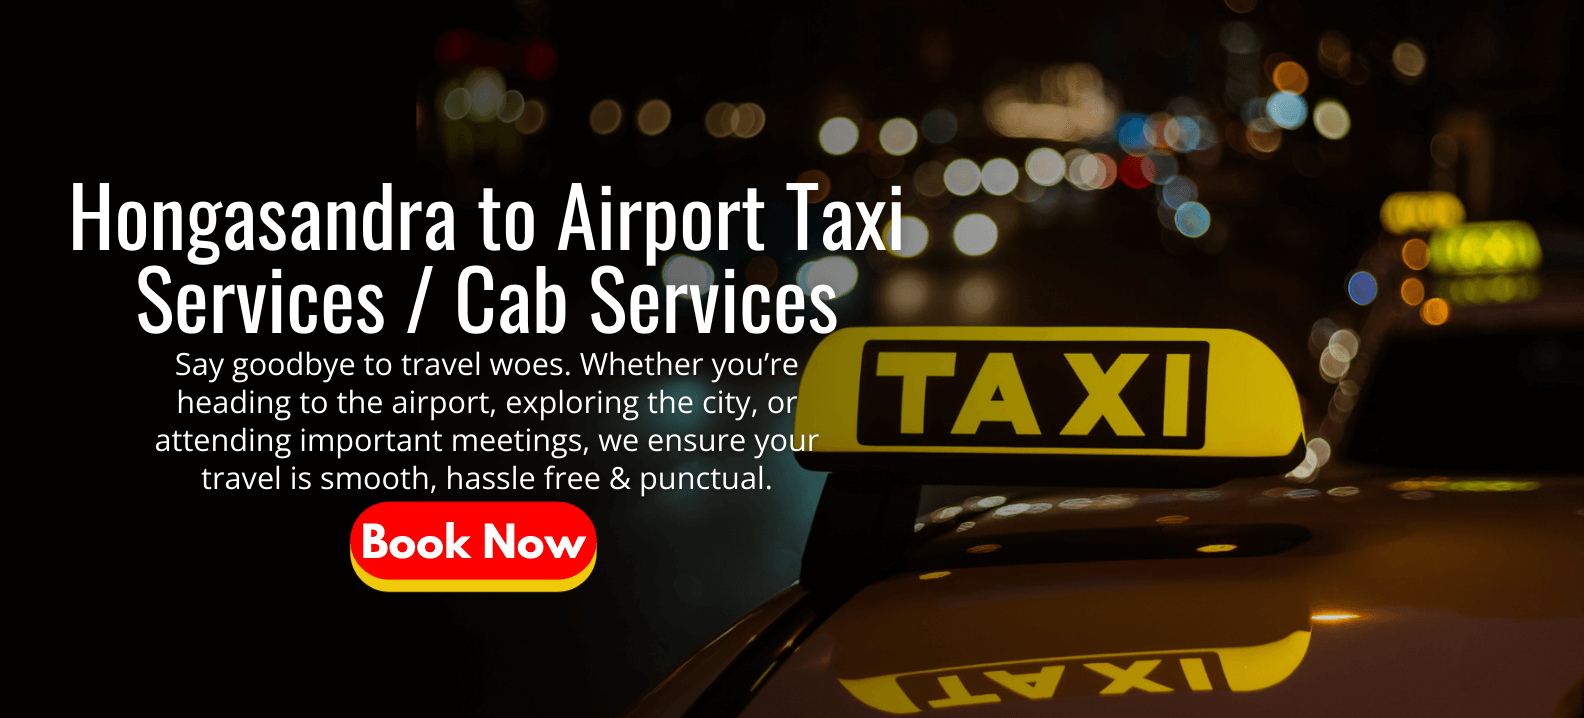 Hongasandra to Airport Taxi Services _ Cab Services